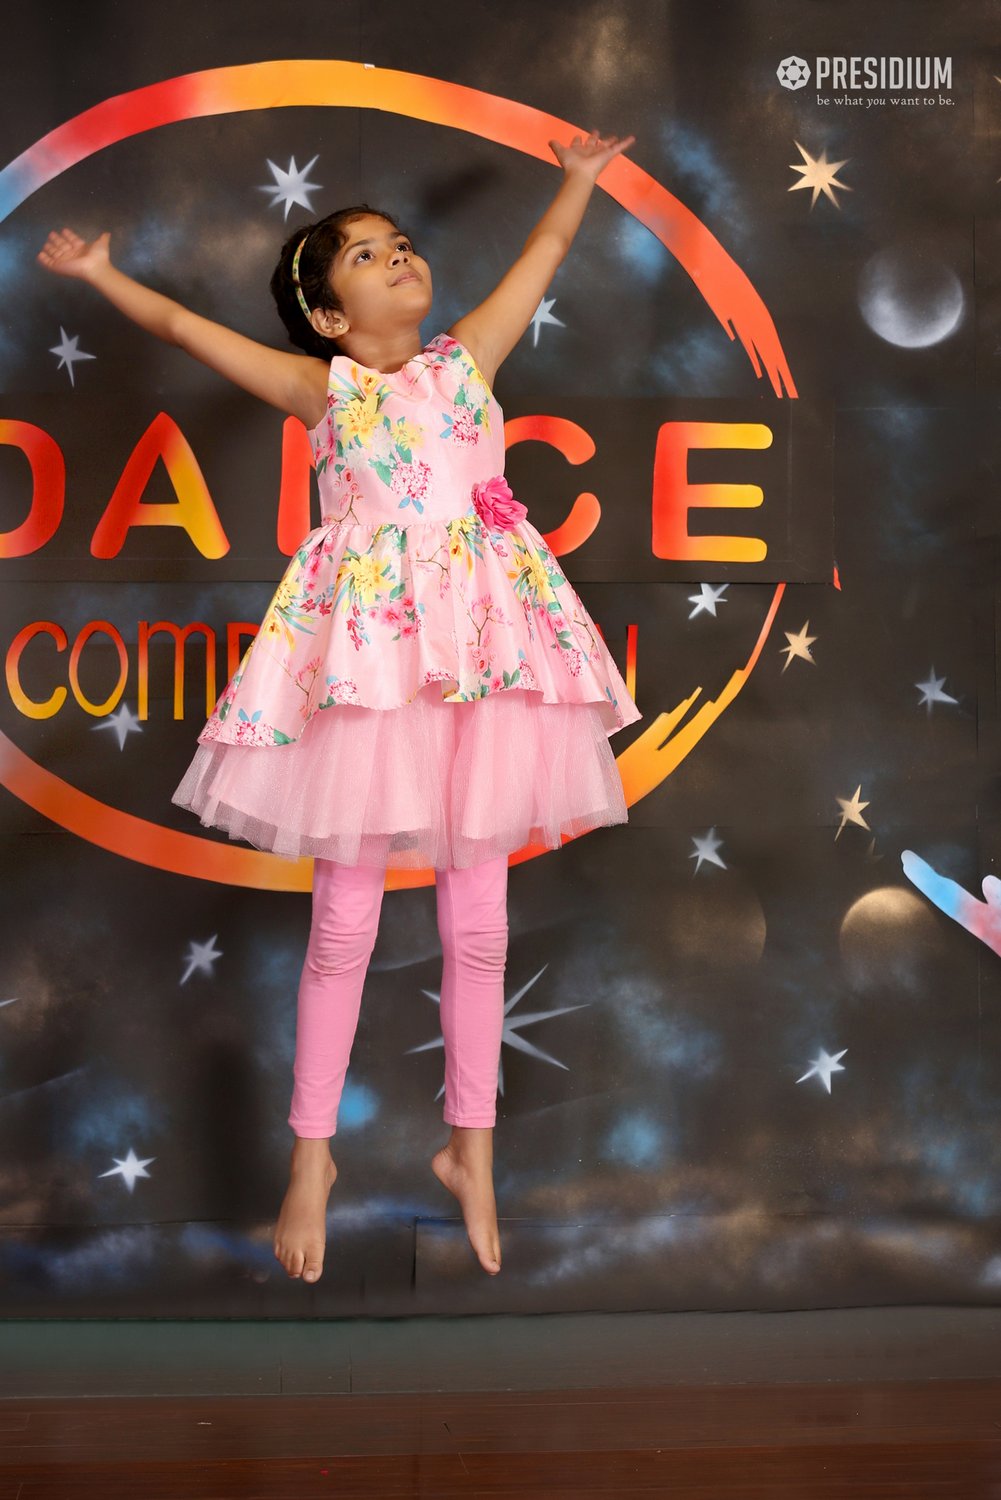 Presidium Gurgaon-57, DANCE COMPETITION: STUDENTS ENTHRALL WITH ENERGETIC PERFORMANCES